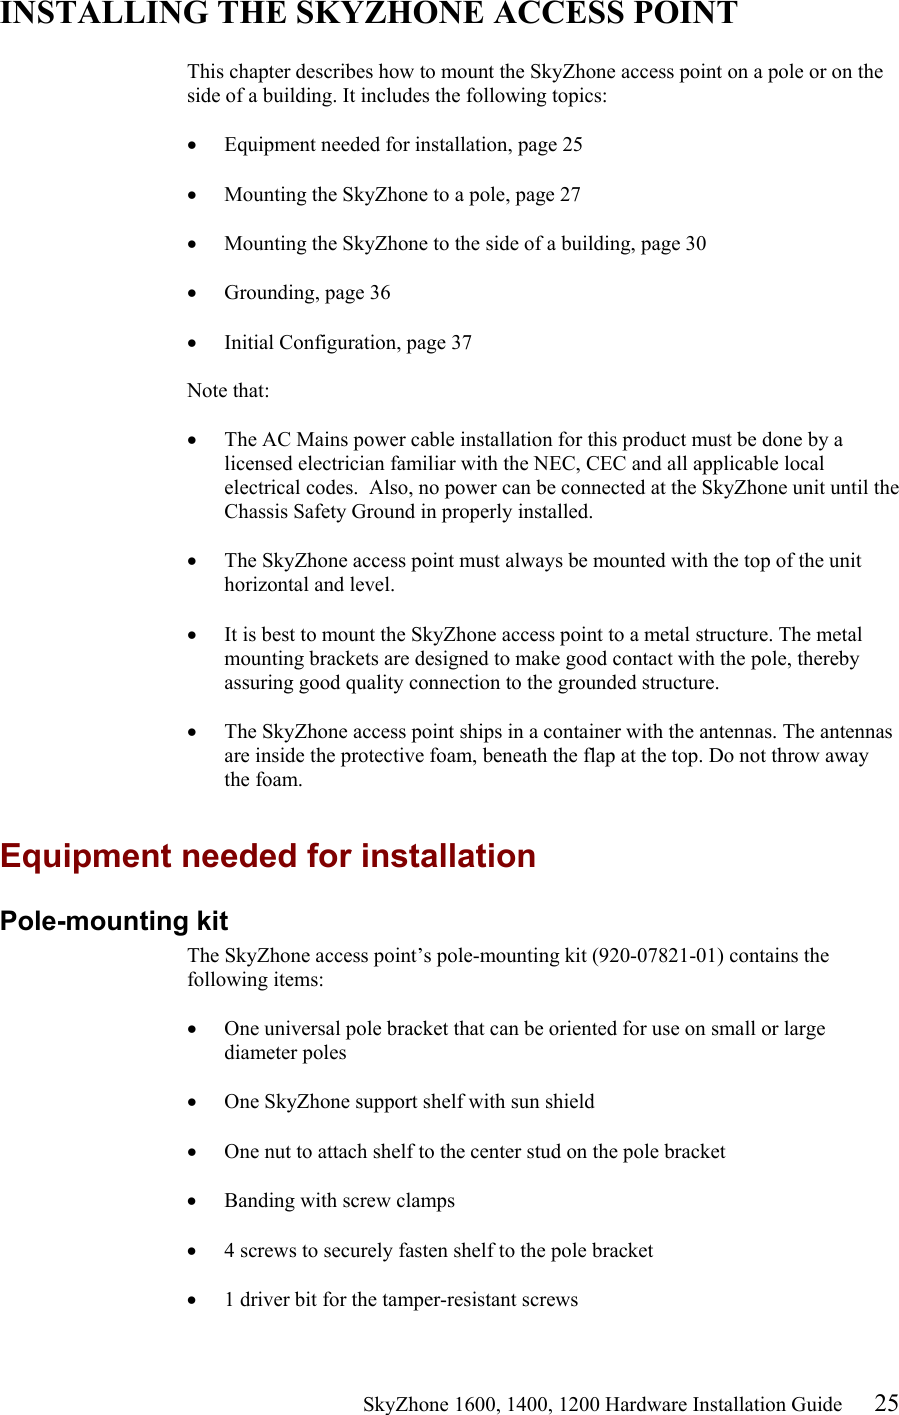                                                    SkyZhone 1600, 1400, 1200 Hardware Installation Guide 25 INSTALLING THE SKYZHONE ACCESS POINT  This chapter describes how to mount the SkyZhone access point on a pole or on the side of a building. It includes the following topics:  •  Equipment needed for installation, page 25  •  Mounting the SkyZhone to a pole, page 27  •  Mounting the SkyZhone to the side of a building, page 30  •  Grounding, page 36  •  Initial Configuration, page 37  Note that:   •  The AC Mains power cable installation for this product must be done by a licensed electrician familiar with the NEC, CEC and all applicable local electrical codes.  Also, no power can be connected at the SkyZhone unit until the Chassis Safety Ground in properly installed.  •  The SkyZhone access point must always be mounted with the top of the unit horizontal and level.  •  It is best to mount the SkyZhone access point to a metal structure. The metal mounting brackets are designed to make good contact with the pole, thereby assuring good quality connection to the grounded structure.  •  The SkyZhone access point ships in a container with the antennas. The antennas are inside the protective foam, beneath the flap at the top. Do not throw away the foam.  Equipment needed for installation Pole-mounting kit The SkyZhone access point’s pole-mounting kit (920-07821-01) contains the following items:  •  One universal pole bracket that can be oriented for use on small or large diameter poles  •  One SkyZhone support shelf with sun shield  •  One nut to attach shelf to the center stud on the pole bracket  •  Banding with screw clamps  •  4 screws to securely fasten shelf to the pole bracket  •  1 driver bit for the tamper-resistant screws 